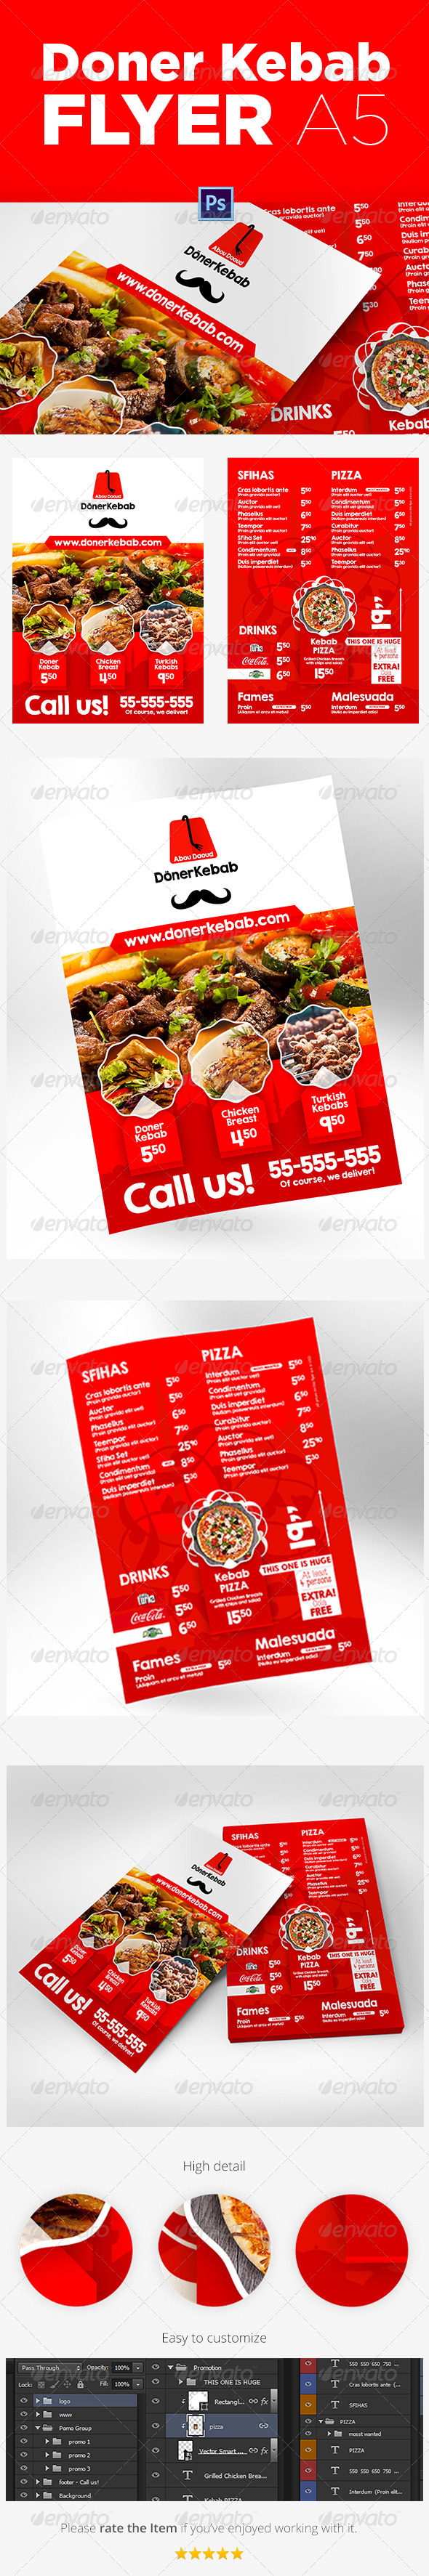 Download Doner Kebab A5 Flyer By Andehau Graphicriver